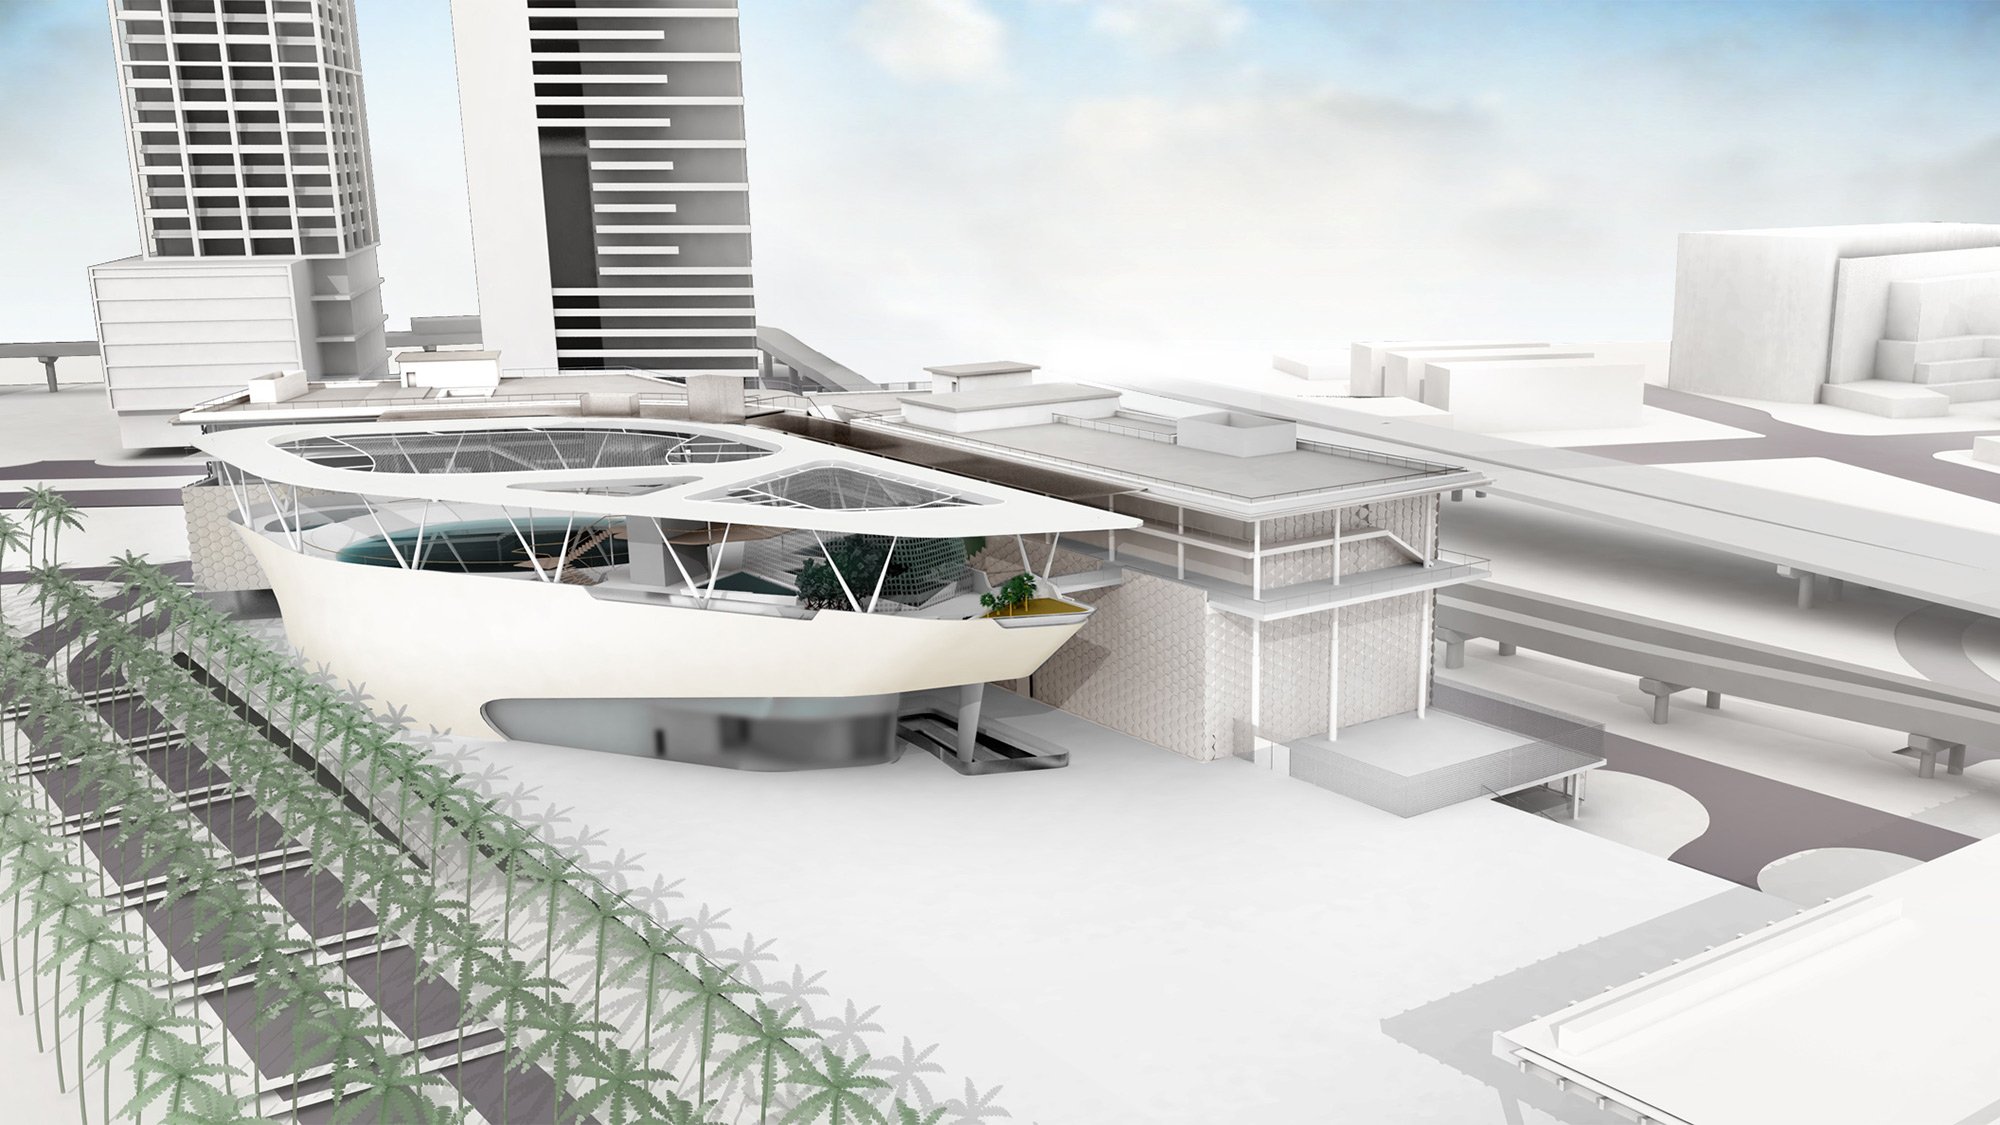 Rendering of the Miami Science Museum